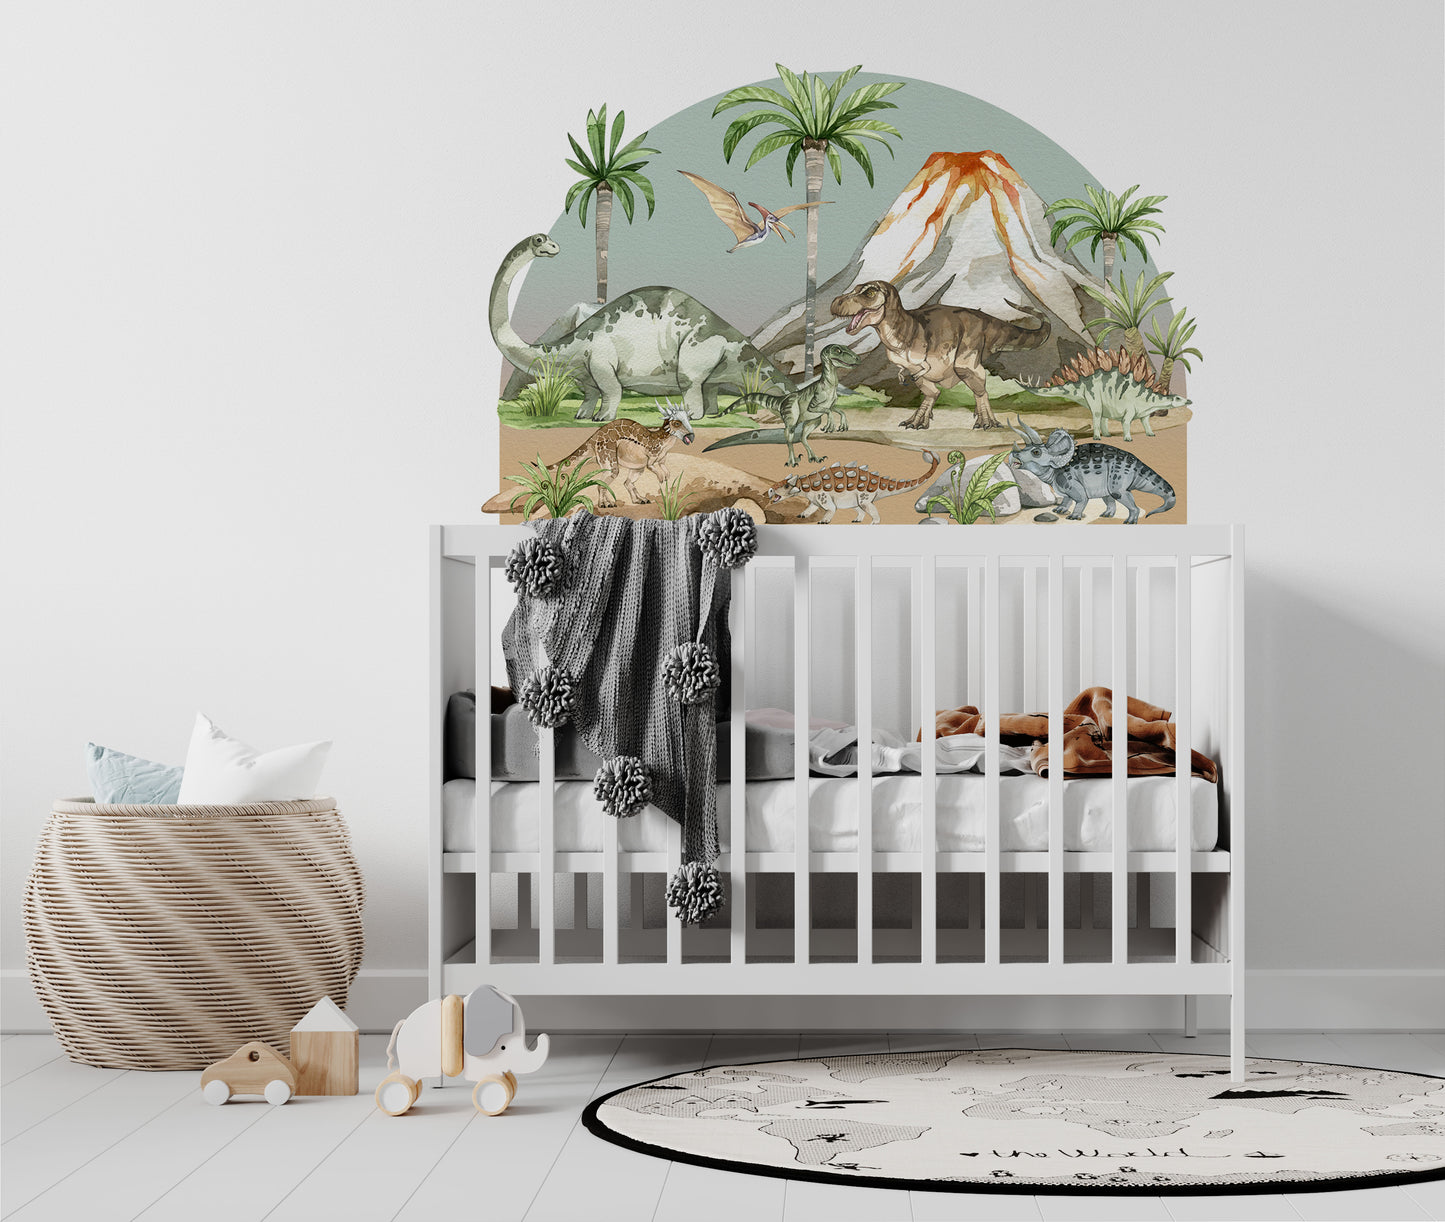 Dinosaurs Wall Decal - Wall Decals - Fable and Fawn 